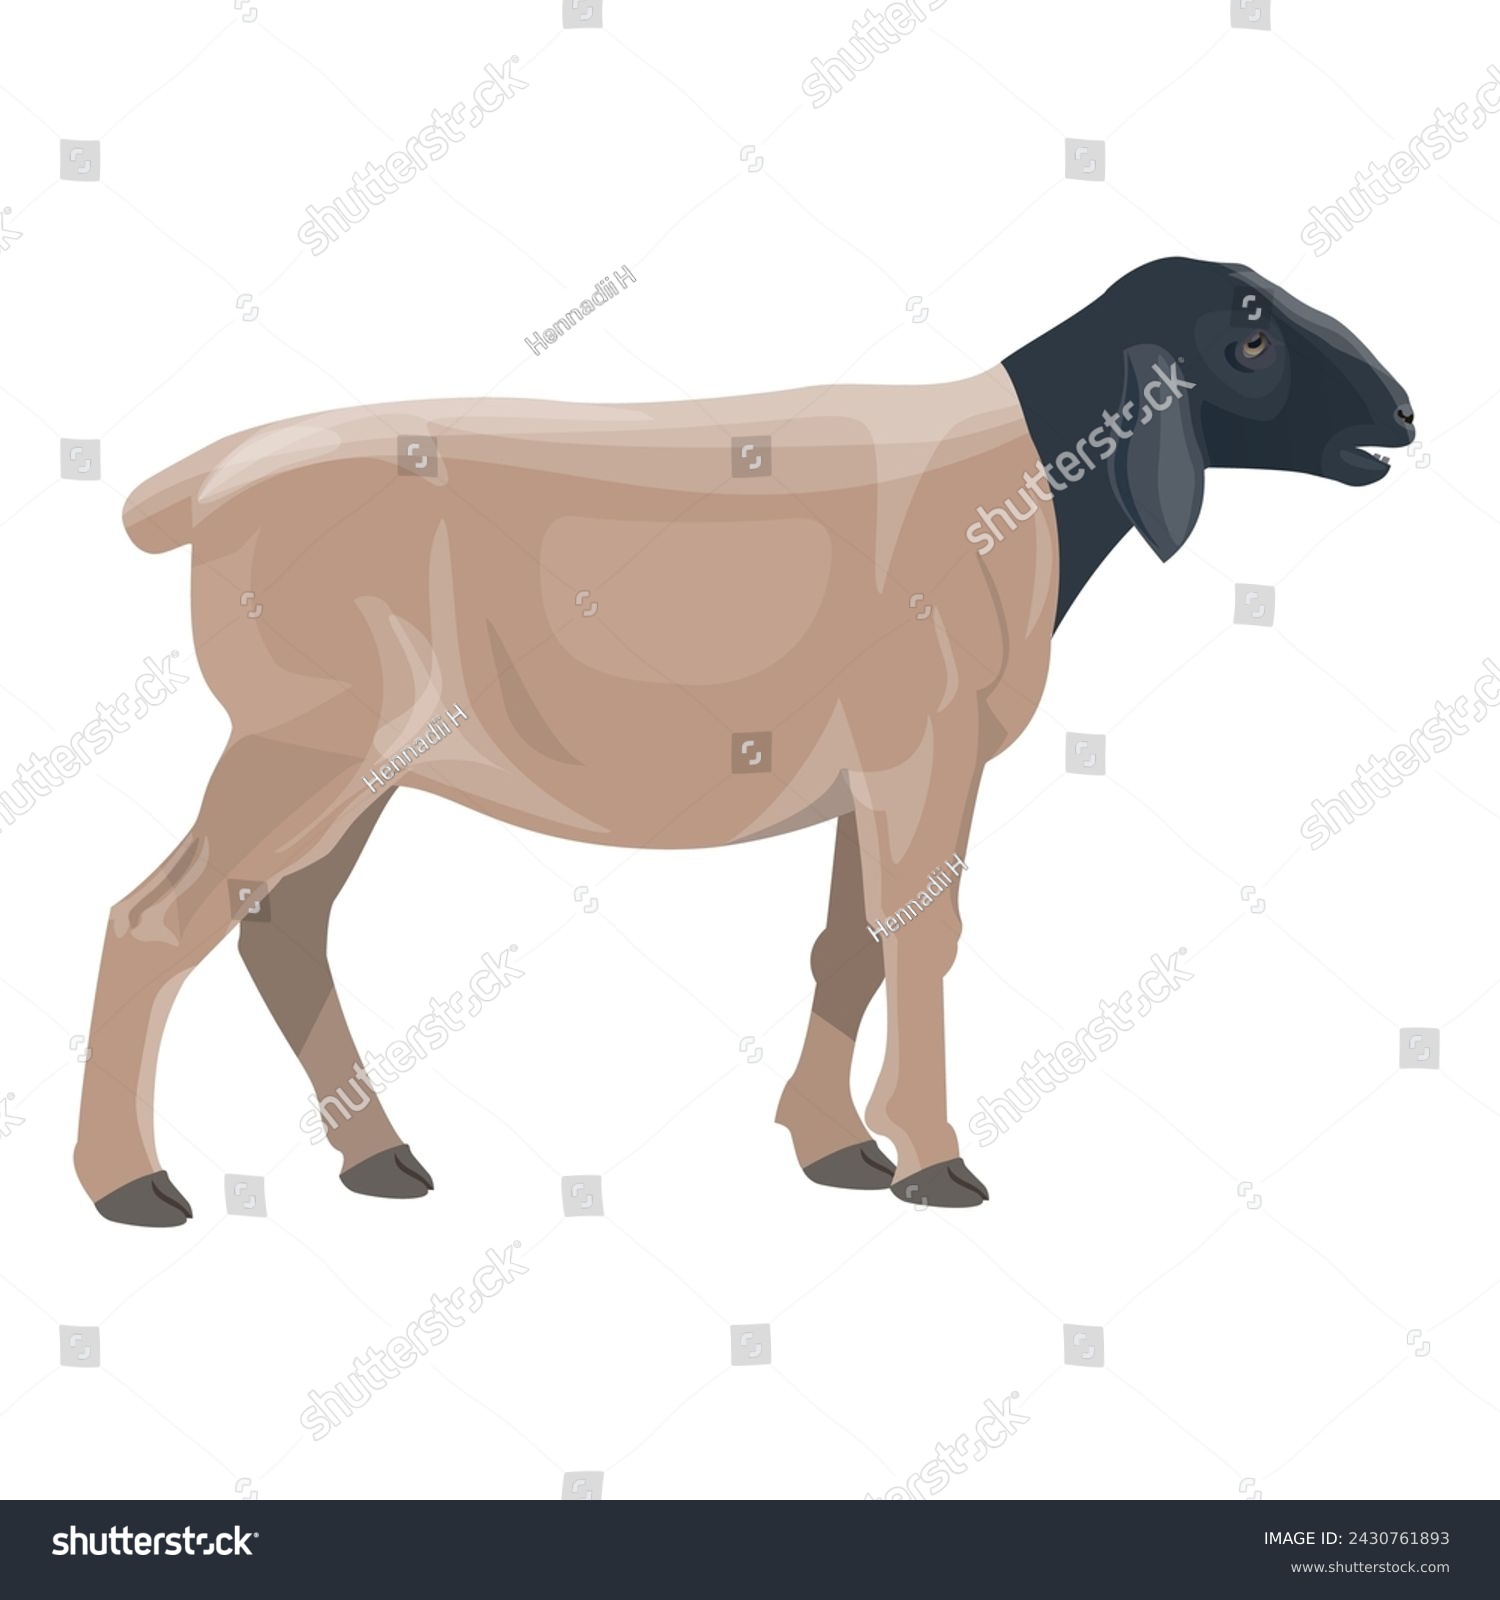 SVG of Dorper sheep with a black head side view. Animal farming. Vector illustration isolated on a white background svg